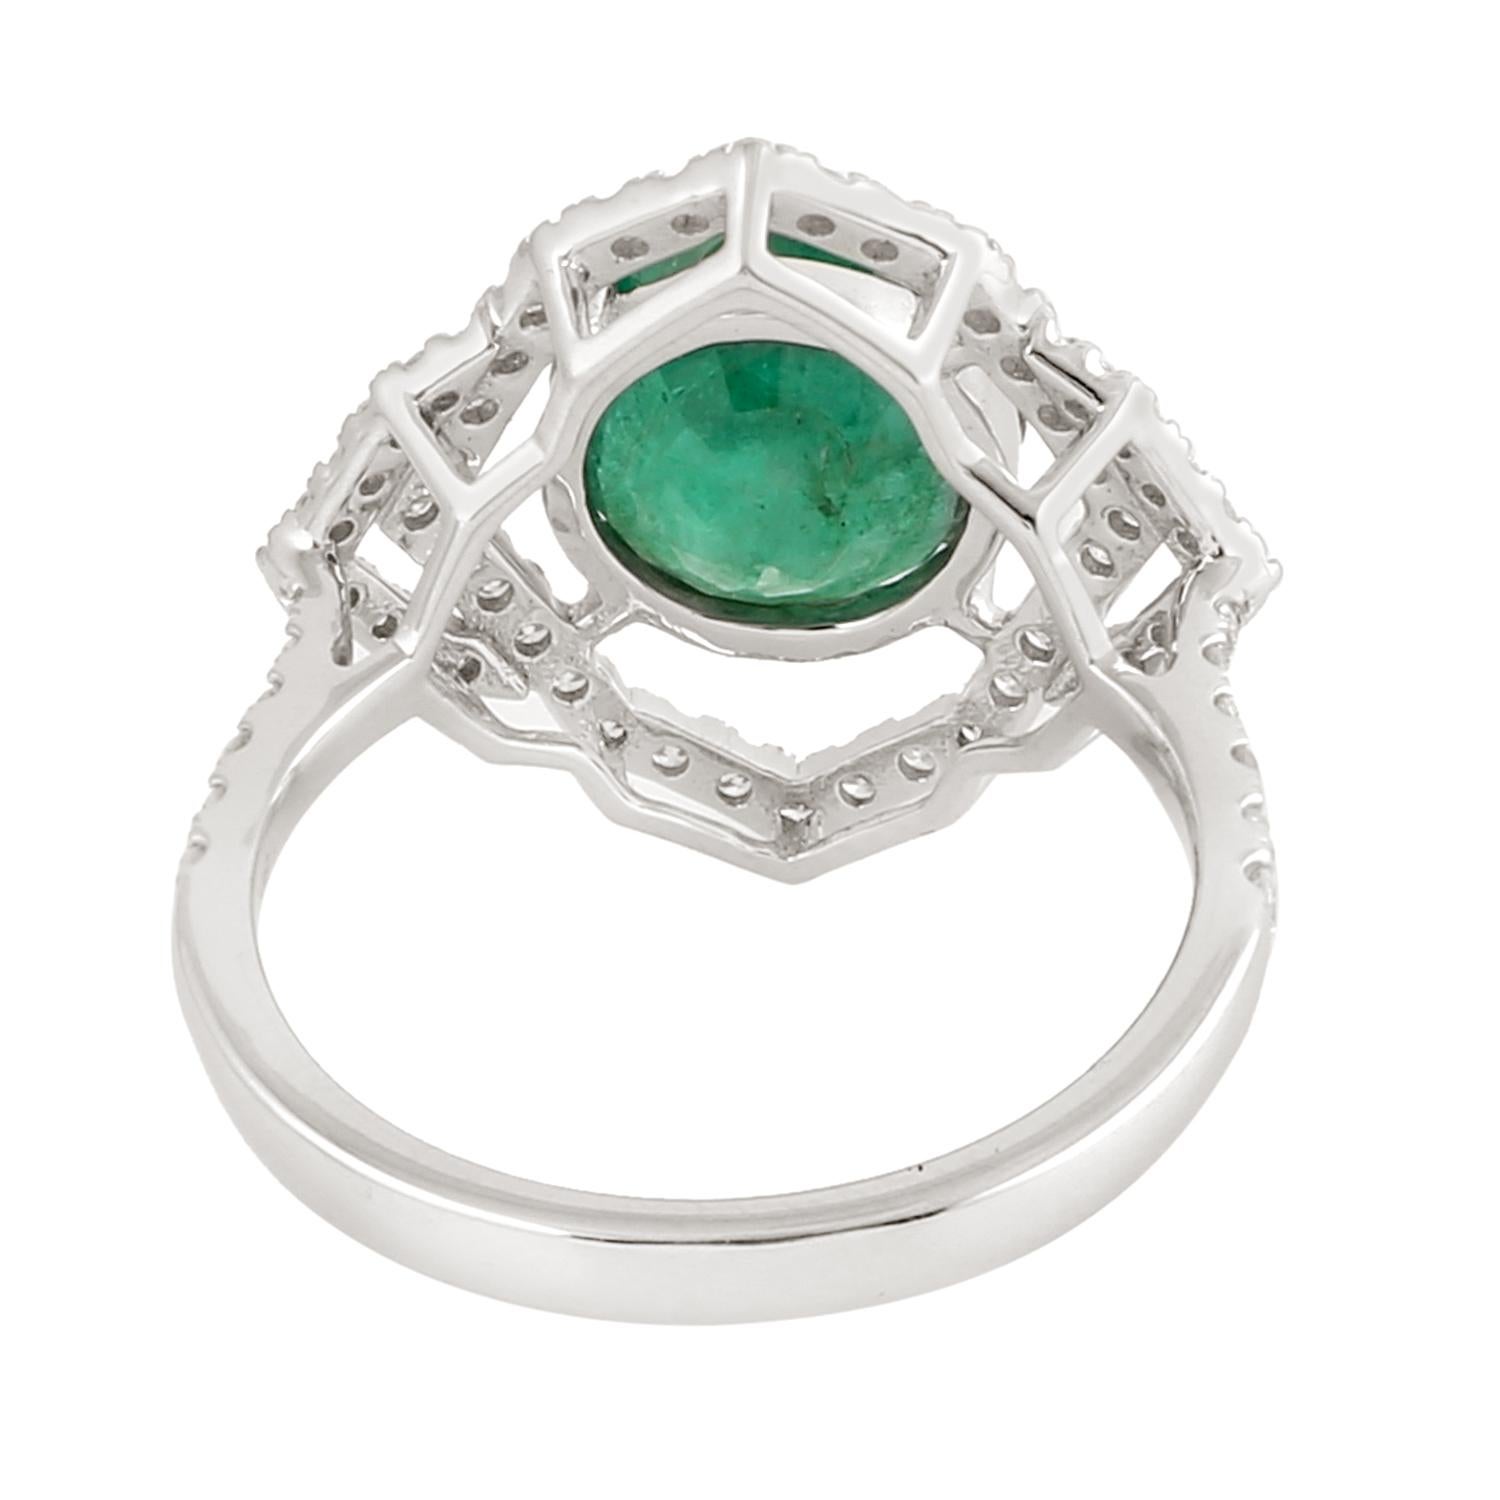 Artisan Natural Emerald Cocktail Ring With Halo Diamonds Made In 18K White Gold For Sale